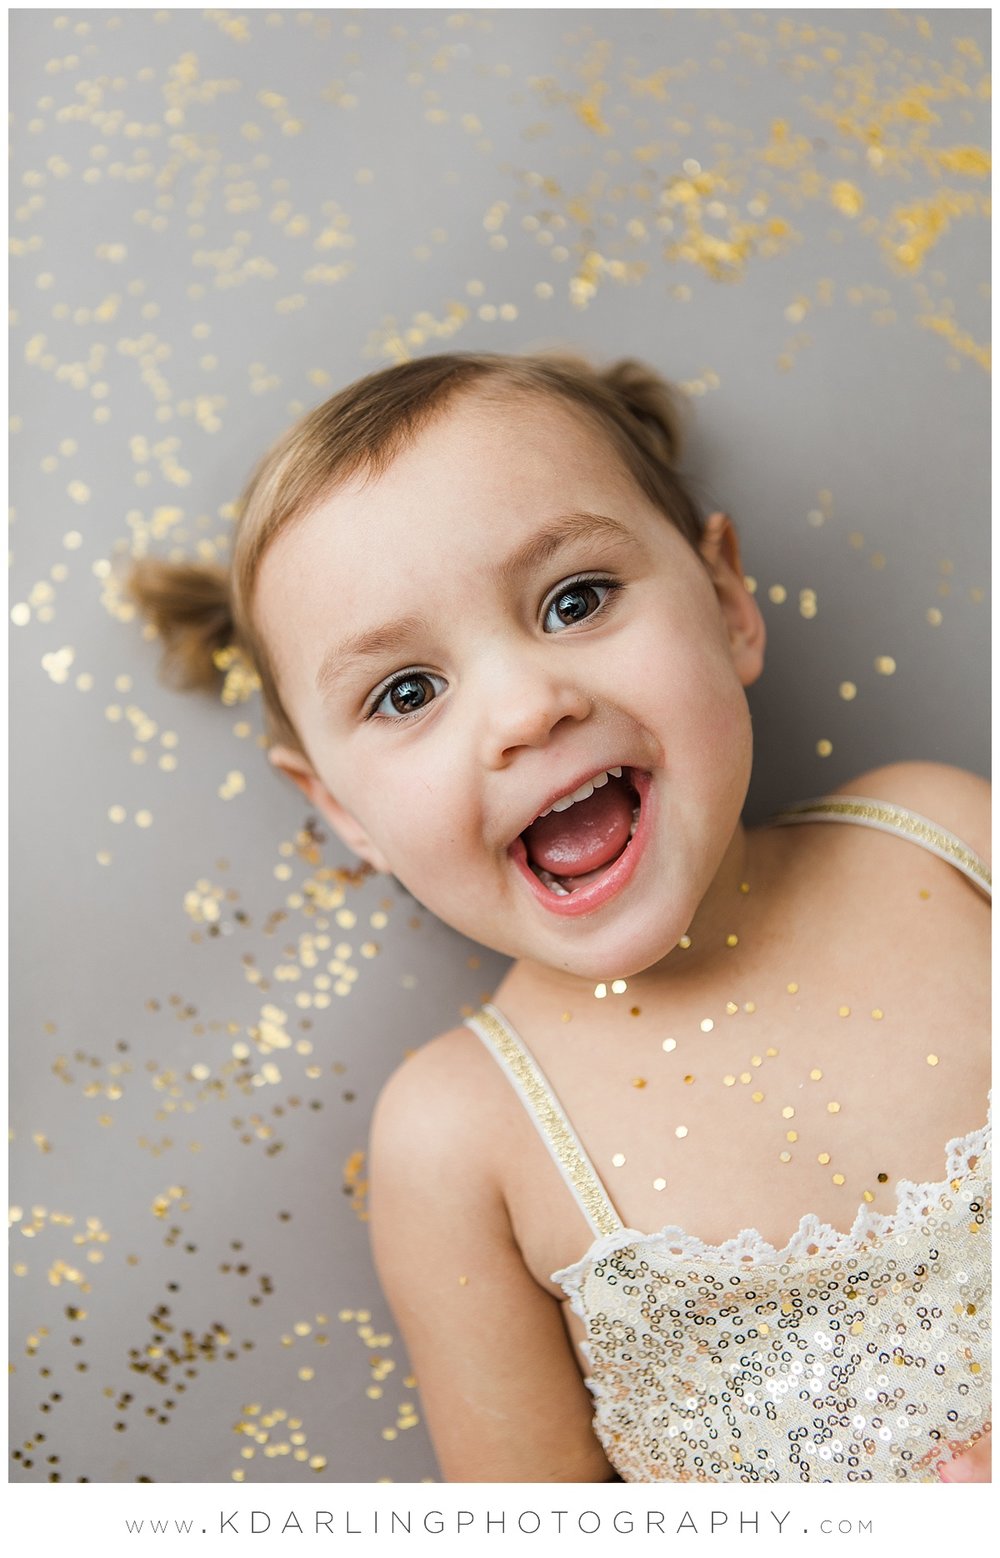 Two year old girl laying in glitter